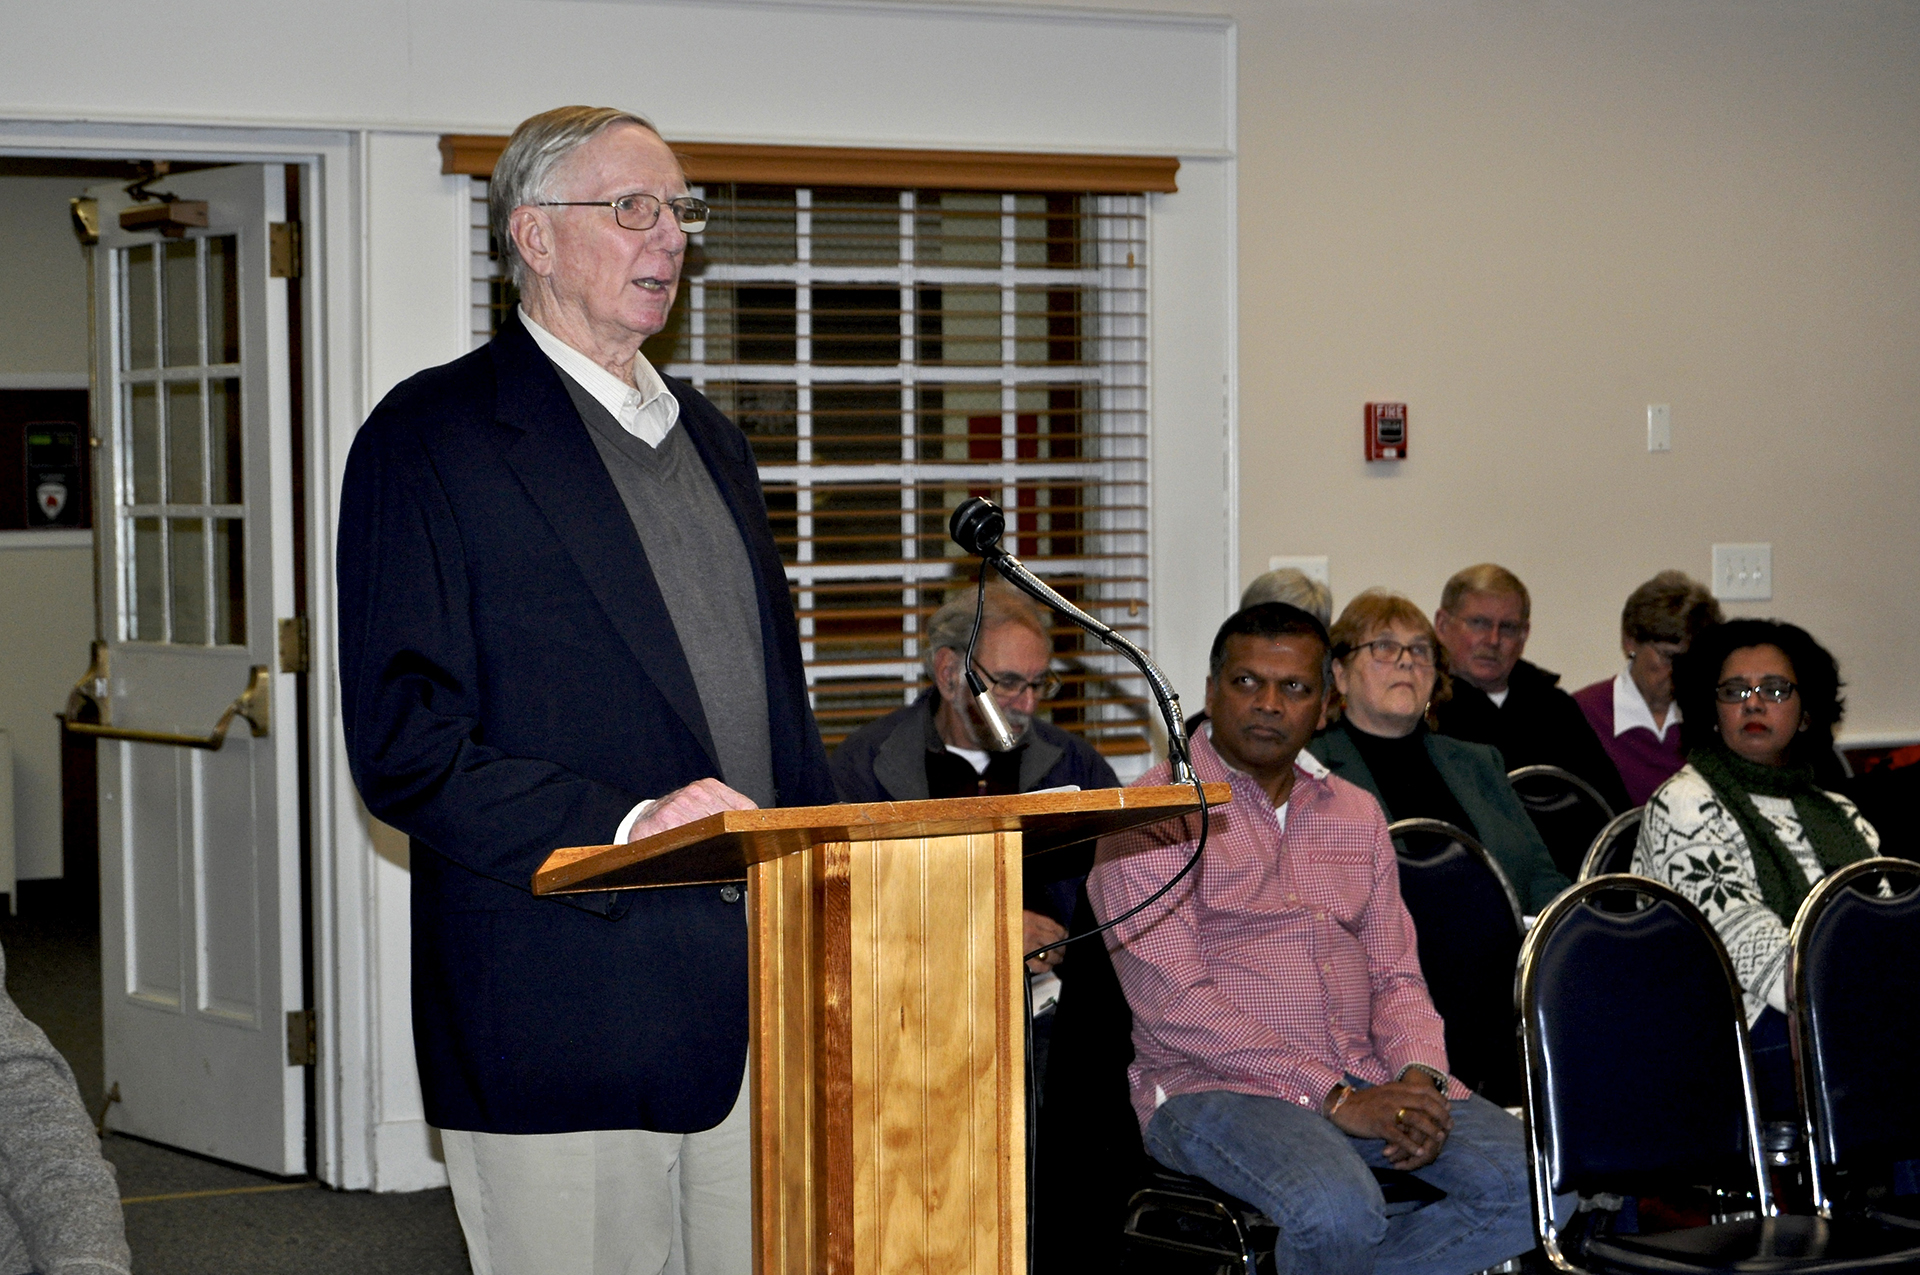 James Reeve, the president of Harold R. Reeve & Sons, speaks to the Southold Town Board February 12 about his business’s request to rezone a parcel at Wickham Avenue and Route 48 in Mattituck